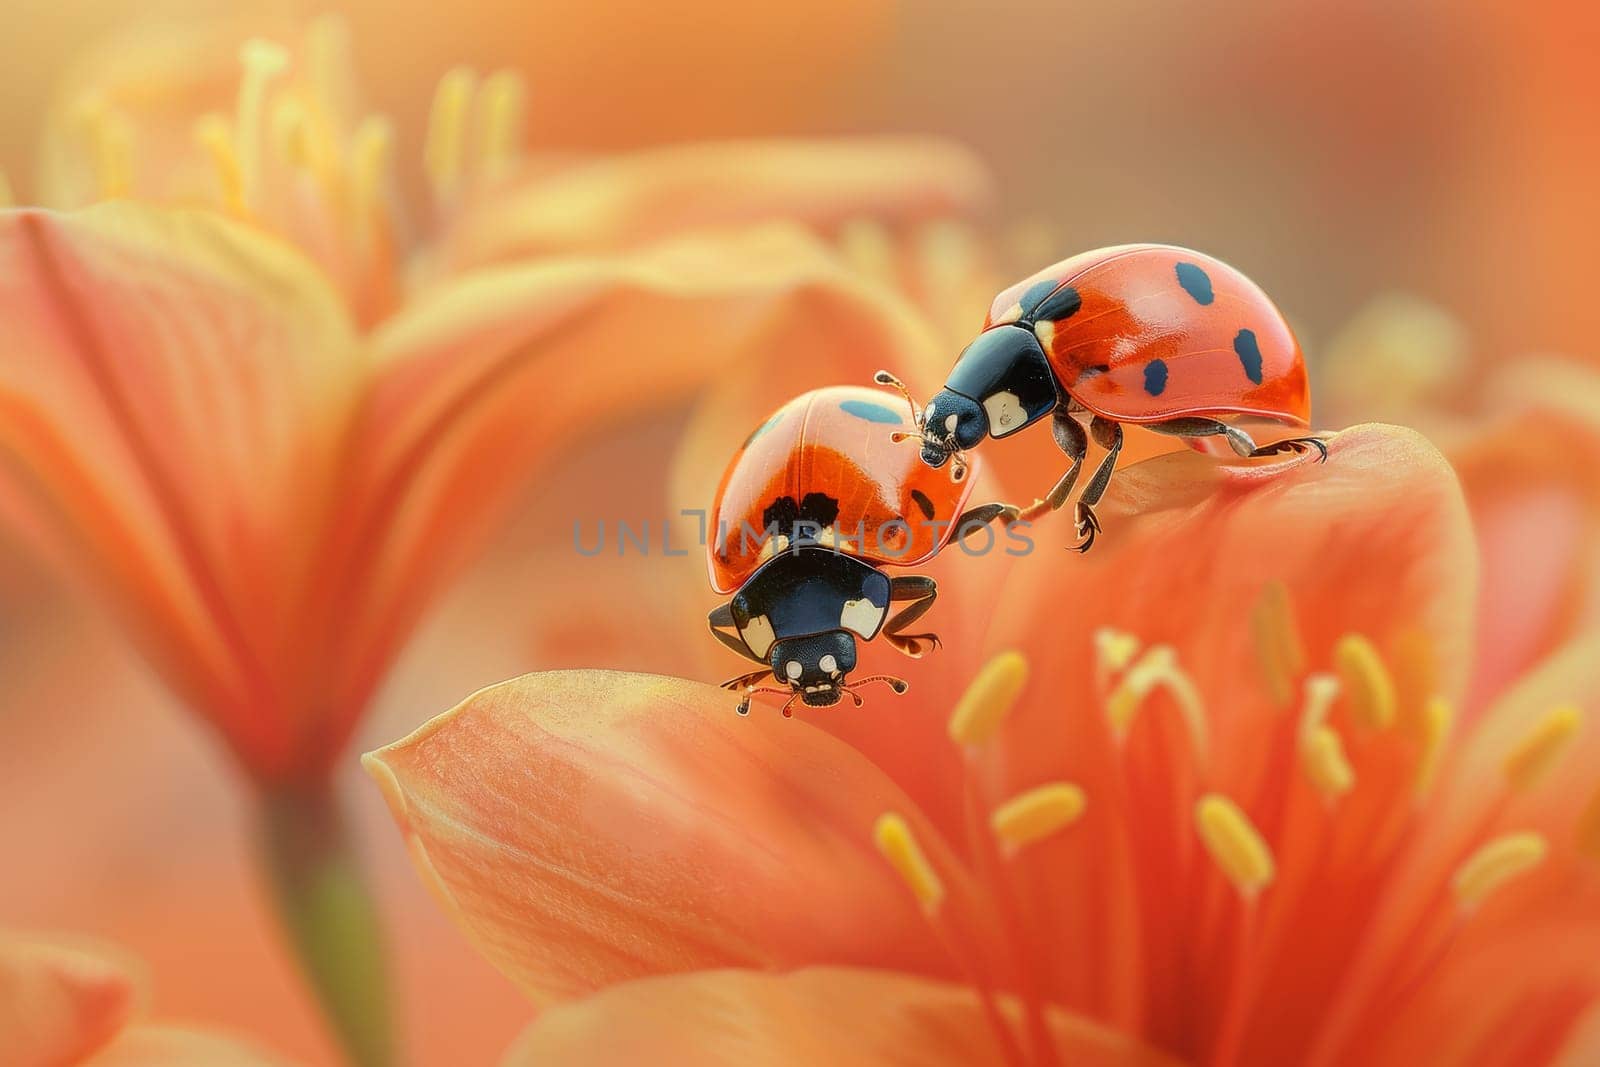 Two ladybugs are on a flower. The flower is orange and has a lot of petals